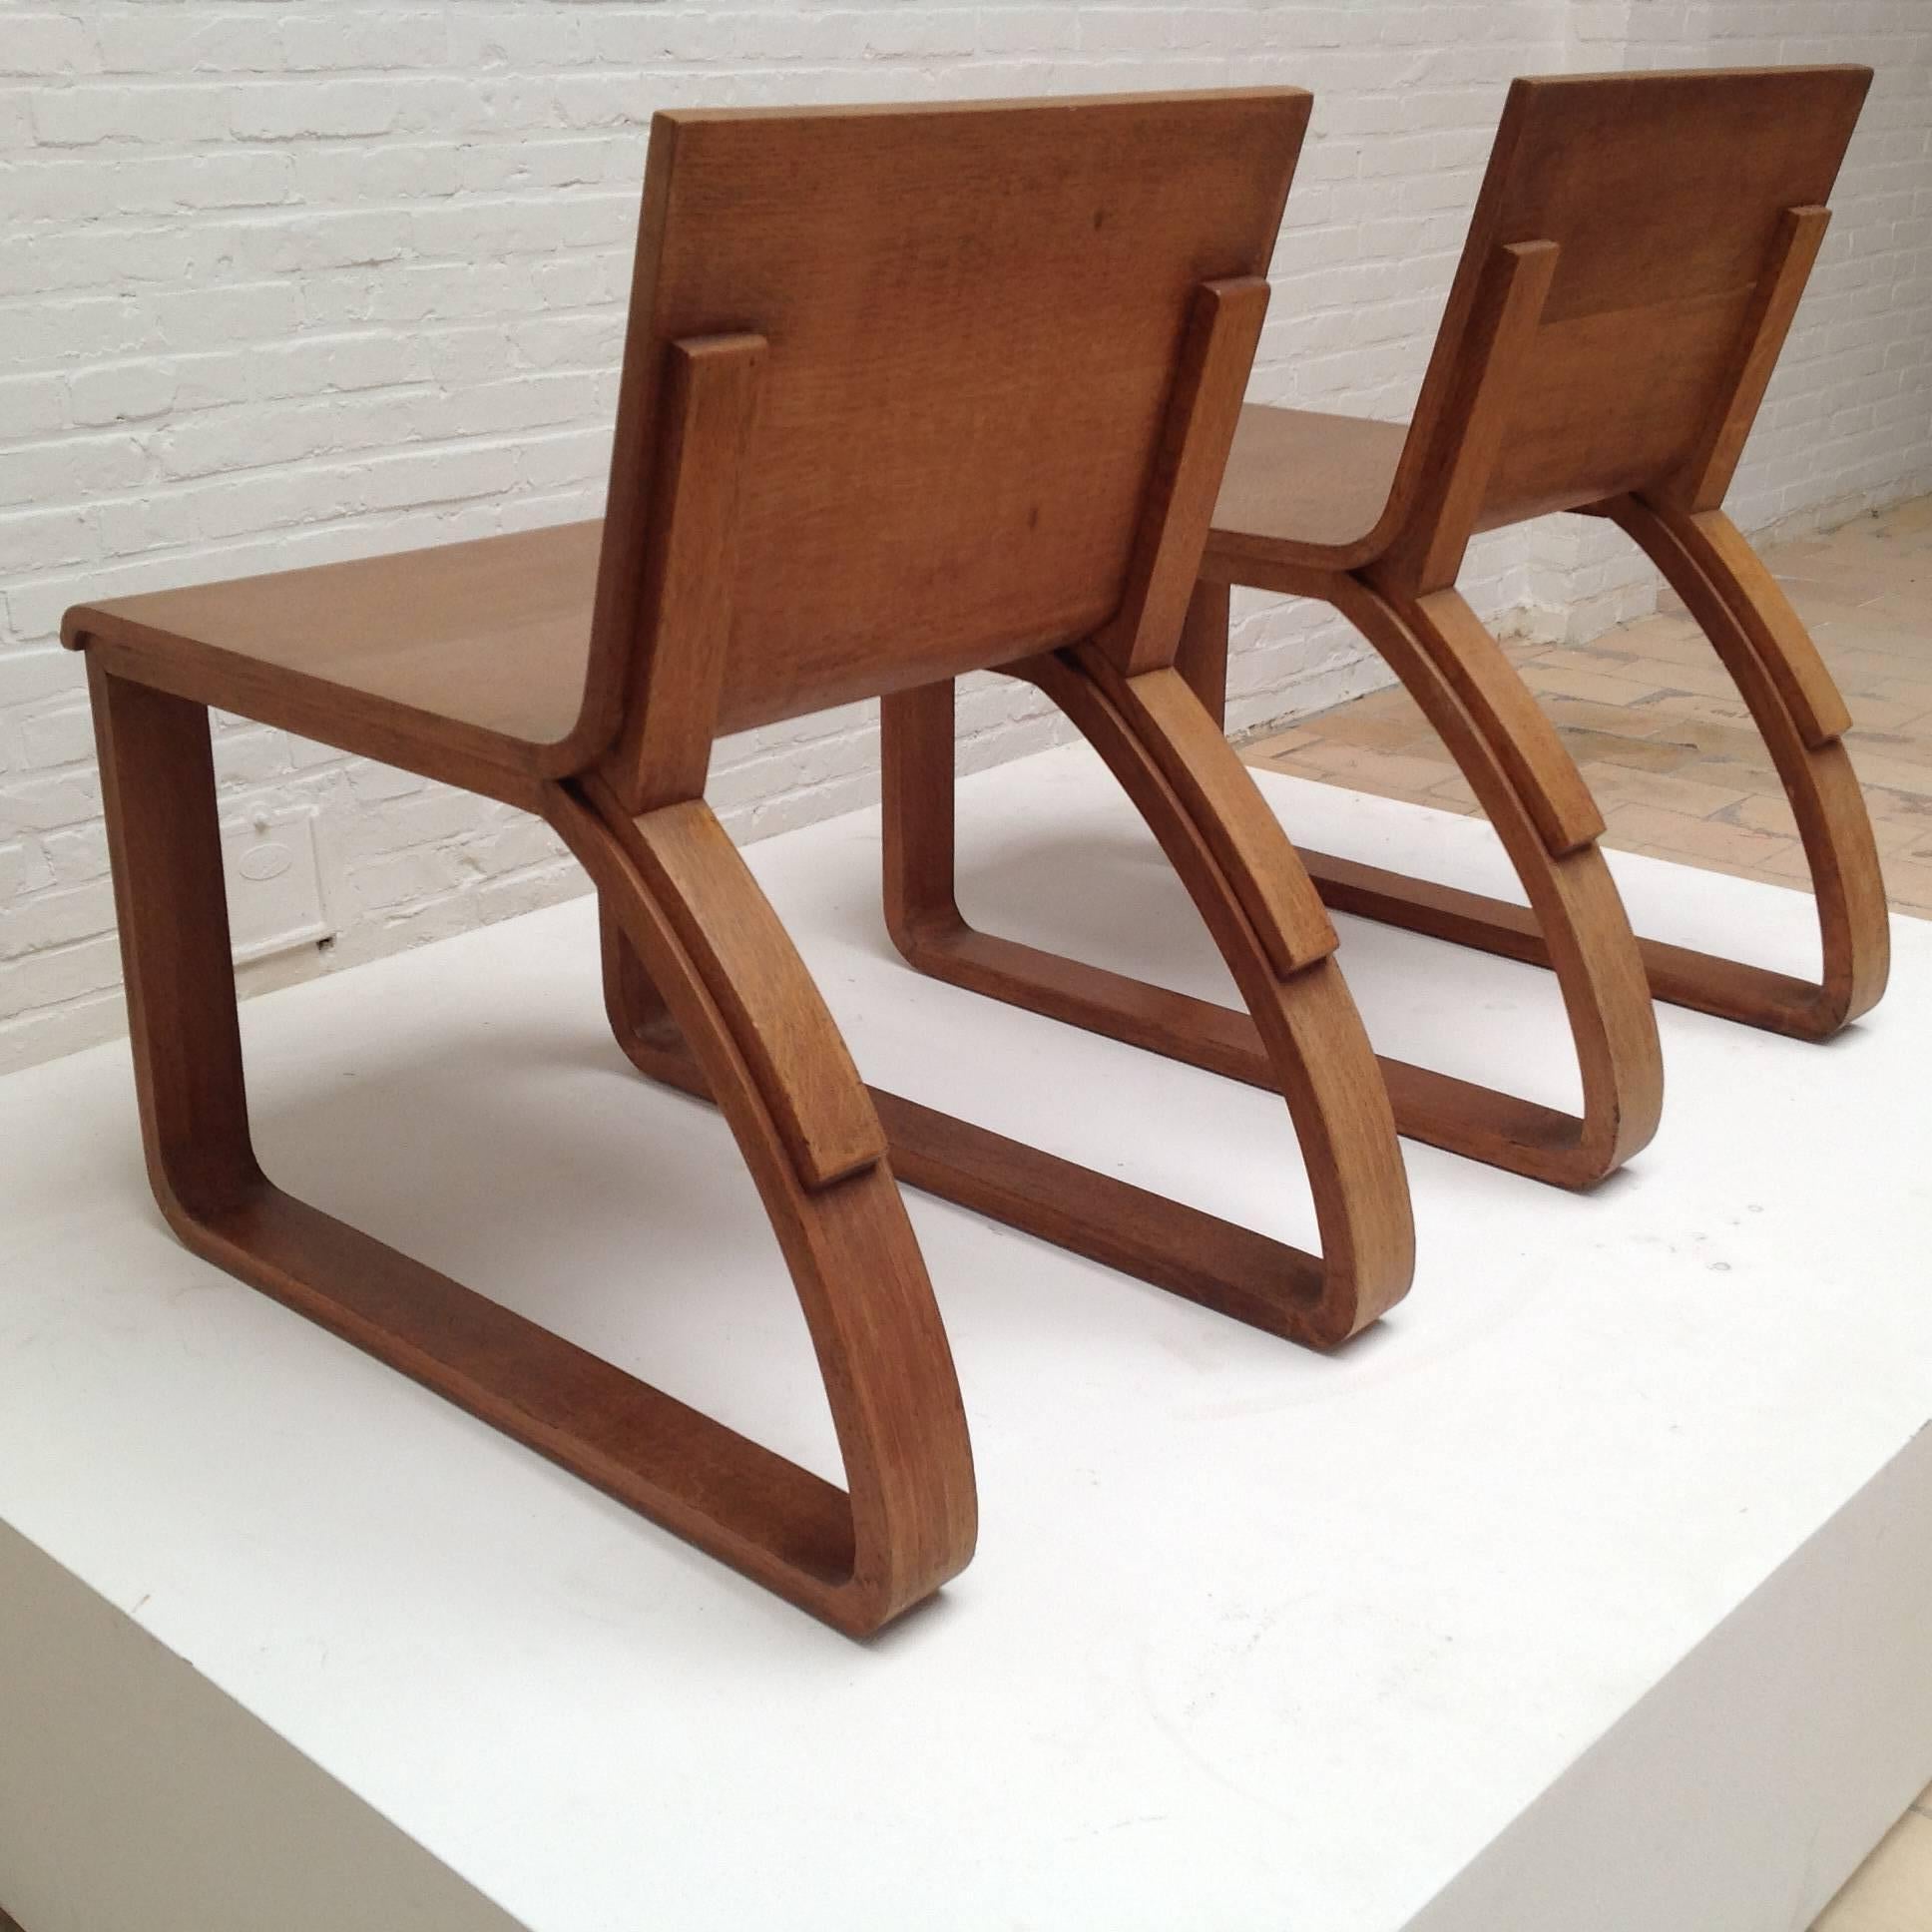 Streamlined Moderne Beautiful Pair of Oak Easy Chairs Design by Audoux Minet, circa 1950 For Sale